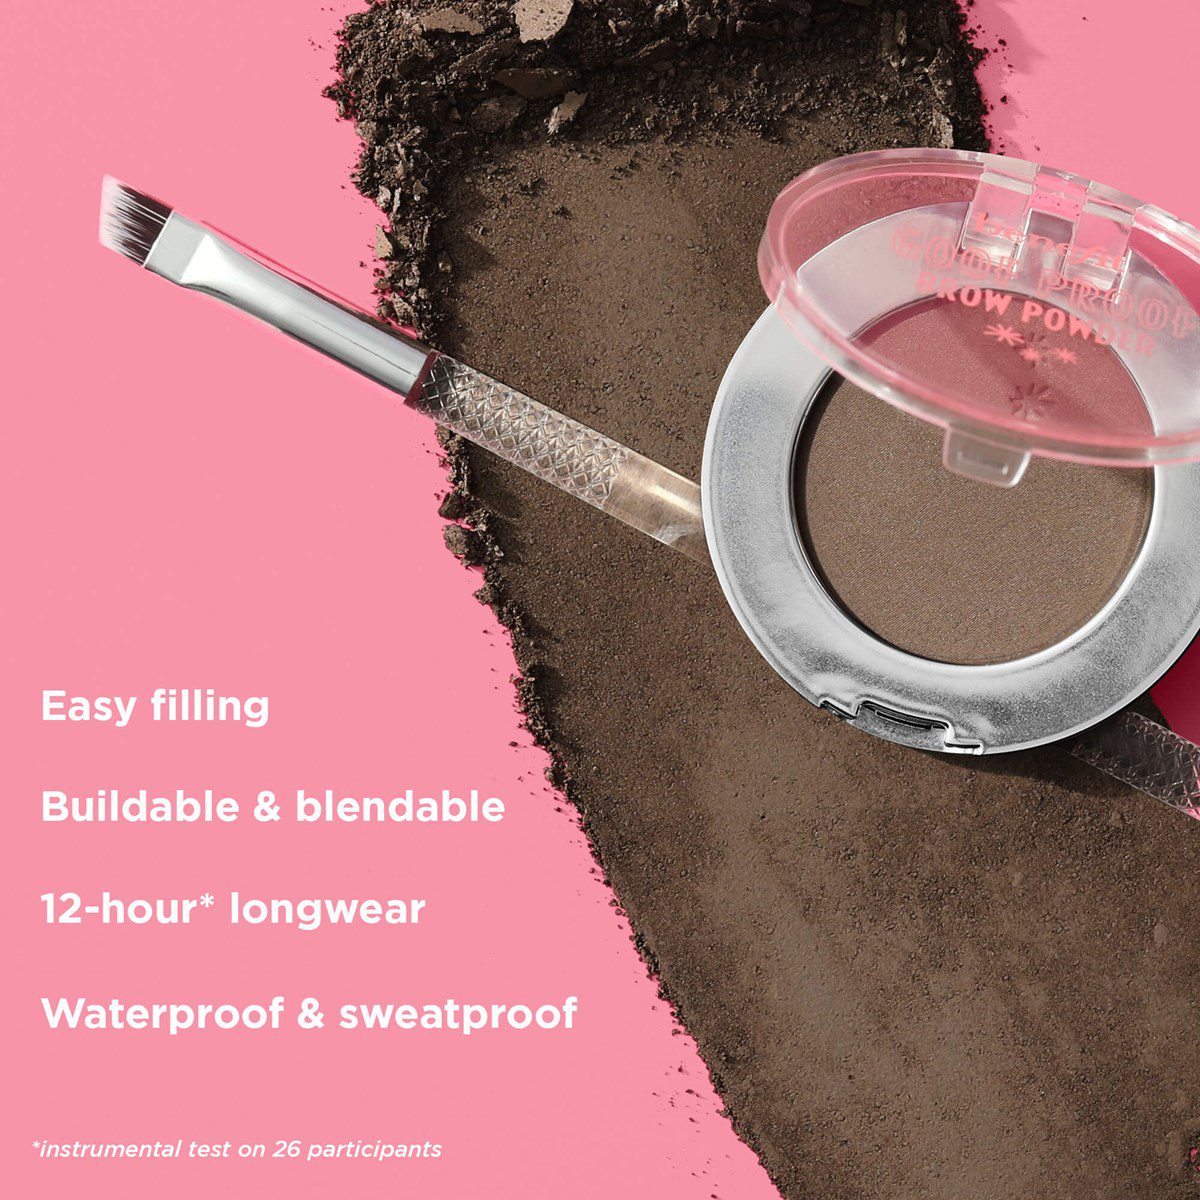 et23_goofproofbrowpowder_productattributeinfographic